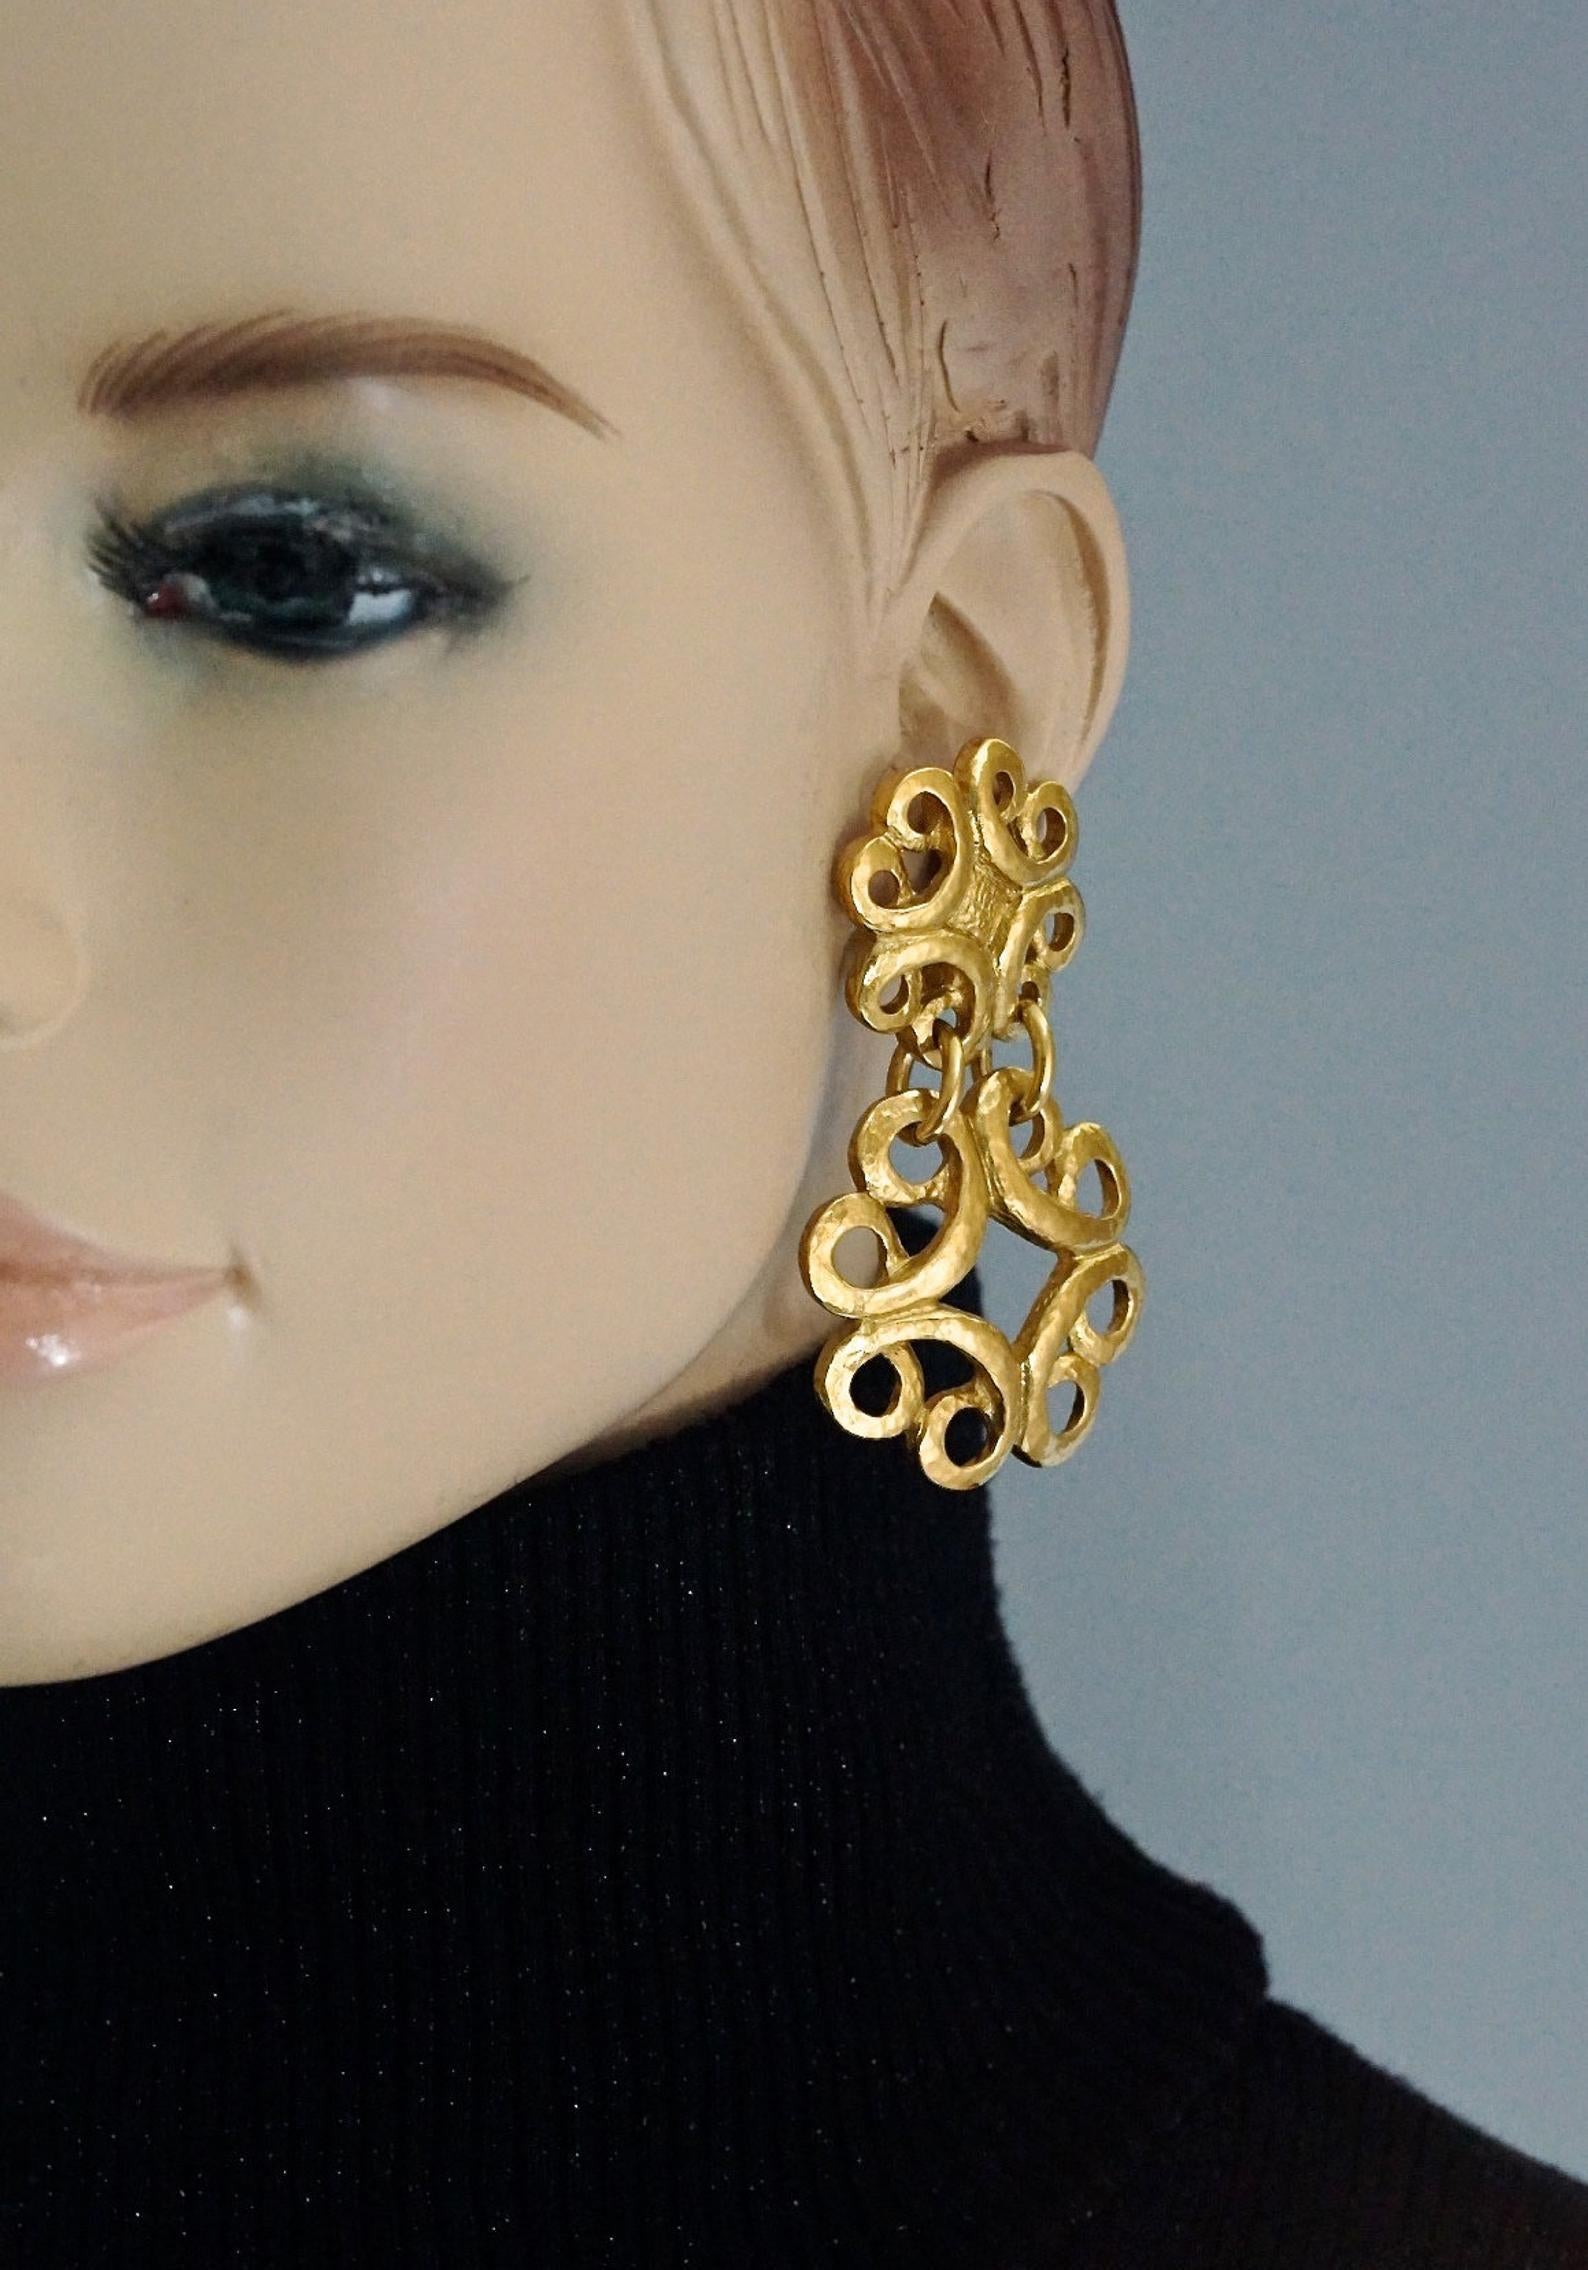 Vintage YVES SAINT LAURENT Ysl Arabesque Dangling Earrings

Measurements:
Height: 2 6/8 inches (7.4 cm)
Width: 1 6/8 inches (4.2 cm)
Weight per Earring: 30 grams

Features:
- 100% Authentic YVES SAINT LAURENT.
- Arabesque style gilt metal.
- Gold